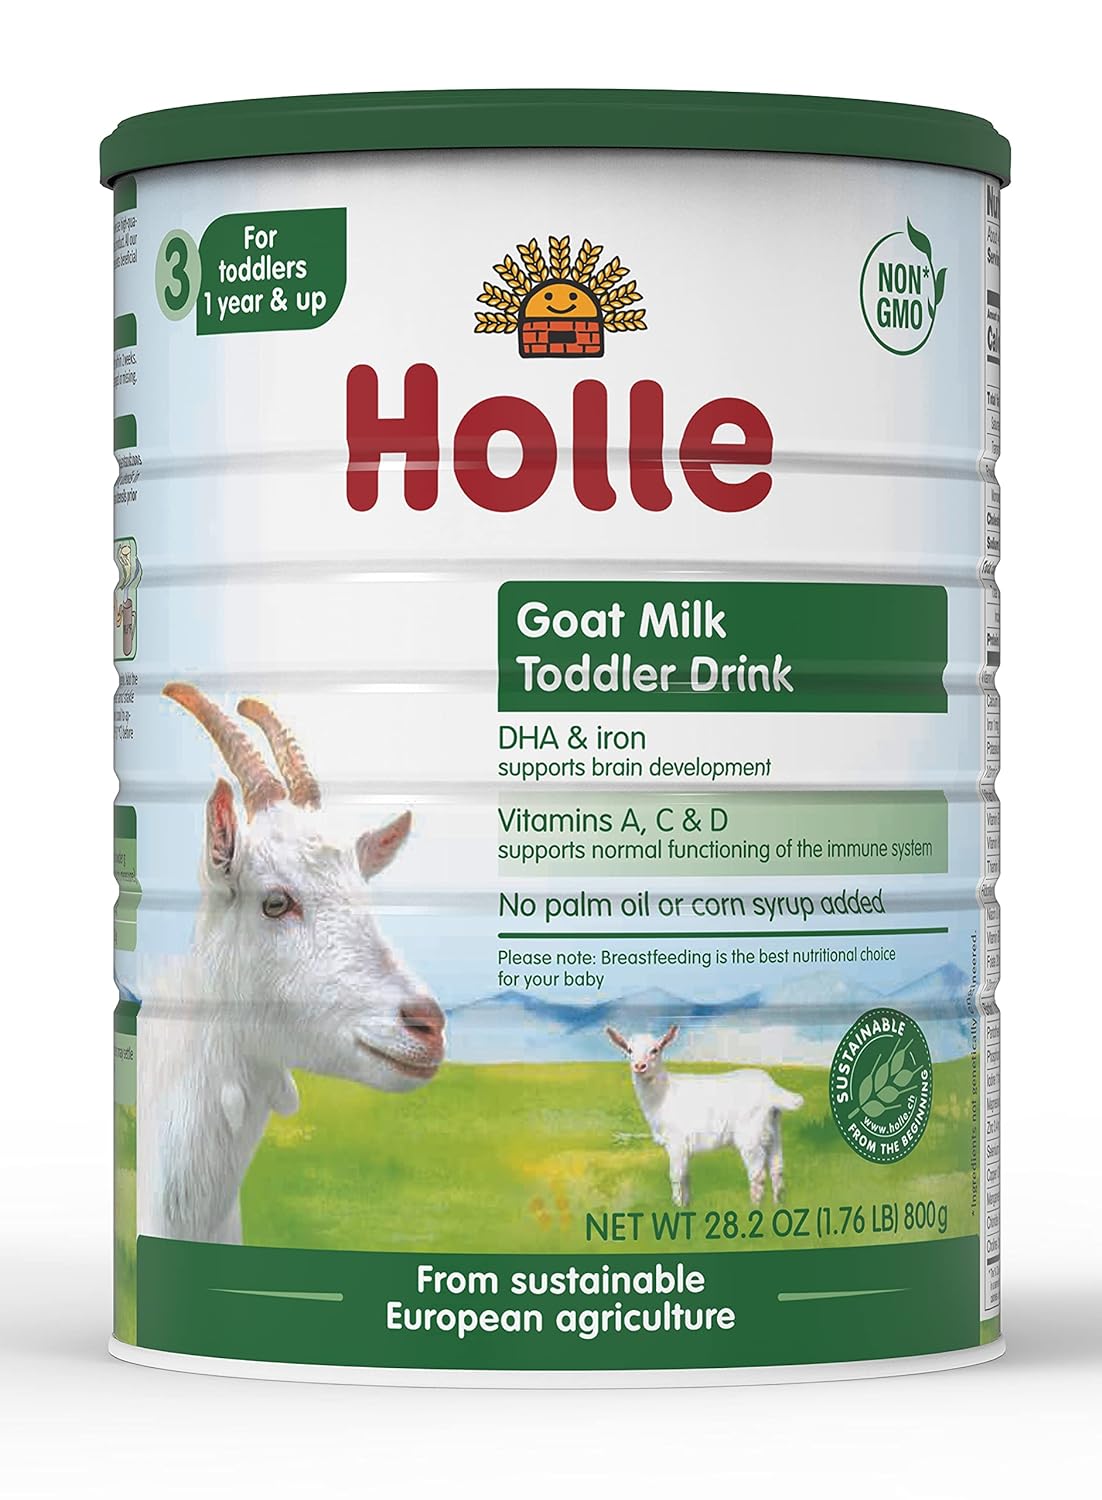 Holle - Goat Milk Toddler Formula - Easy to digest - Non-GMO with DHA for Healthy Brain Development - 1 Year & Up